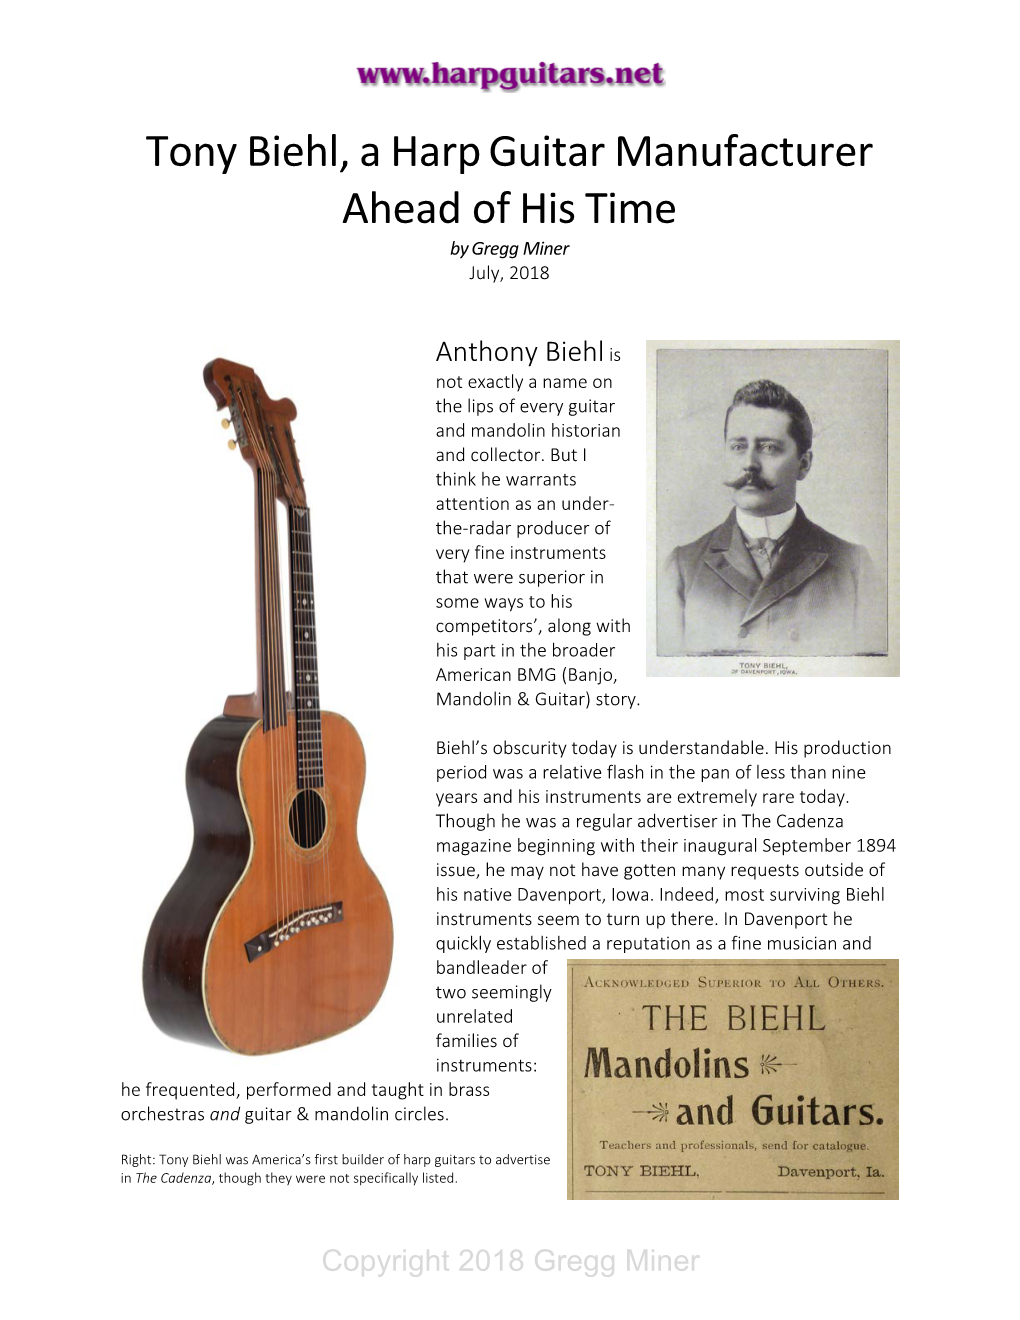 Tony Biehl, a Harp Guitar Manufacturer Ahead of His Time by Gregg Miner July, 2018